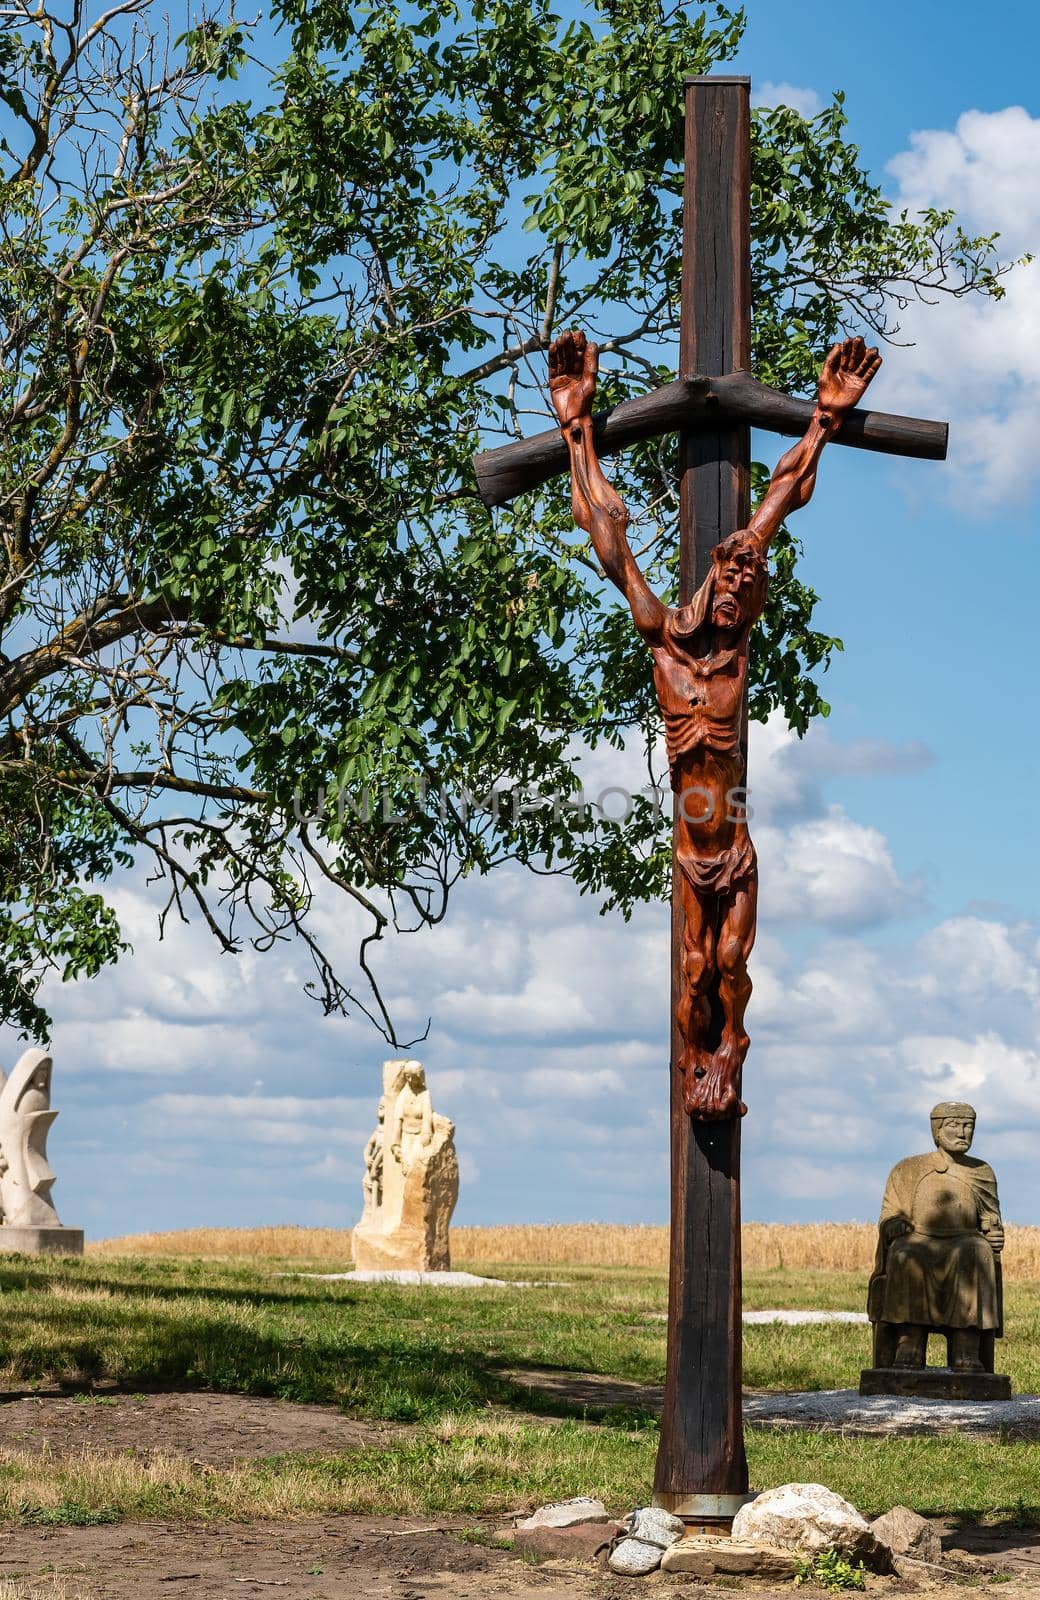 Ratiskovice, Czech Republic - July 7 - The mythical hill of Naklo near Ratiskovice Christ on the cross installed by the Royal Order of Moravian Knights on Naklo hill in Ratiskovice